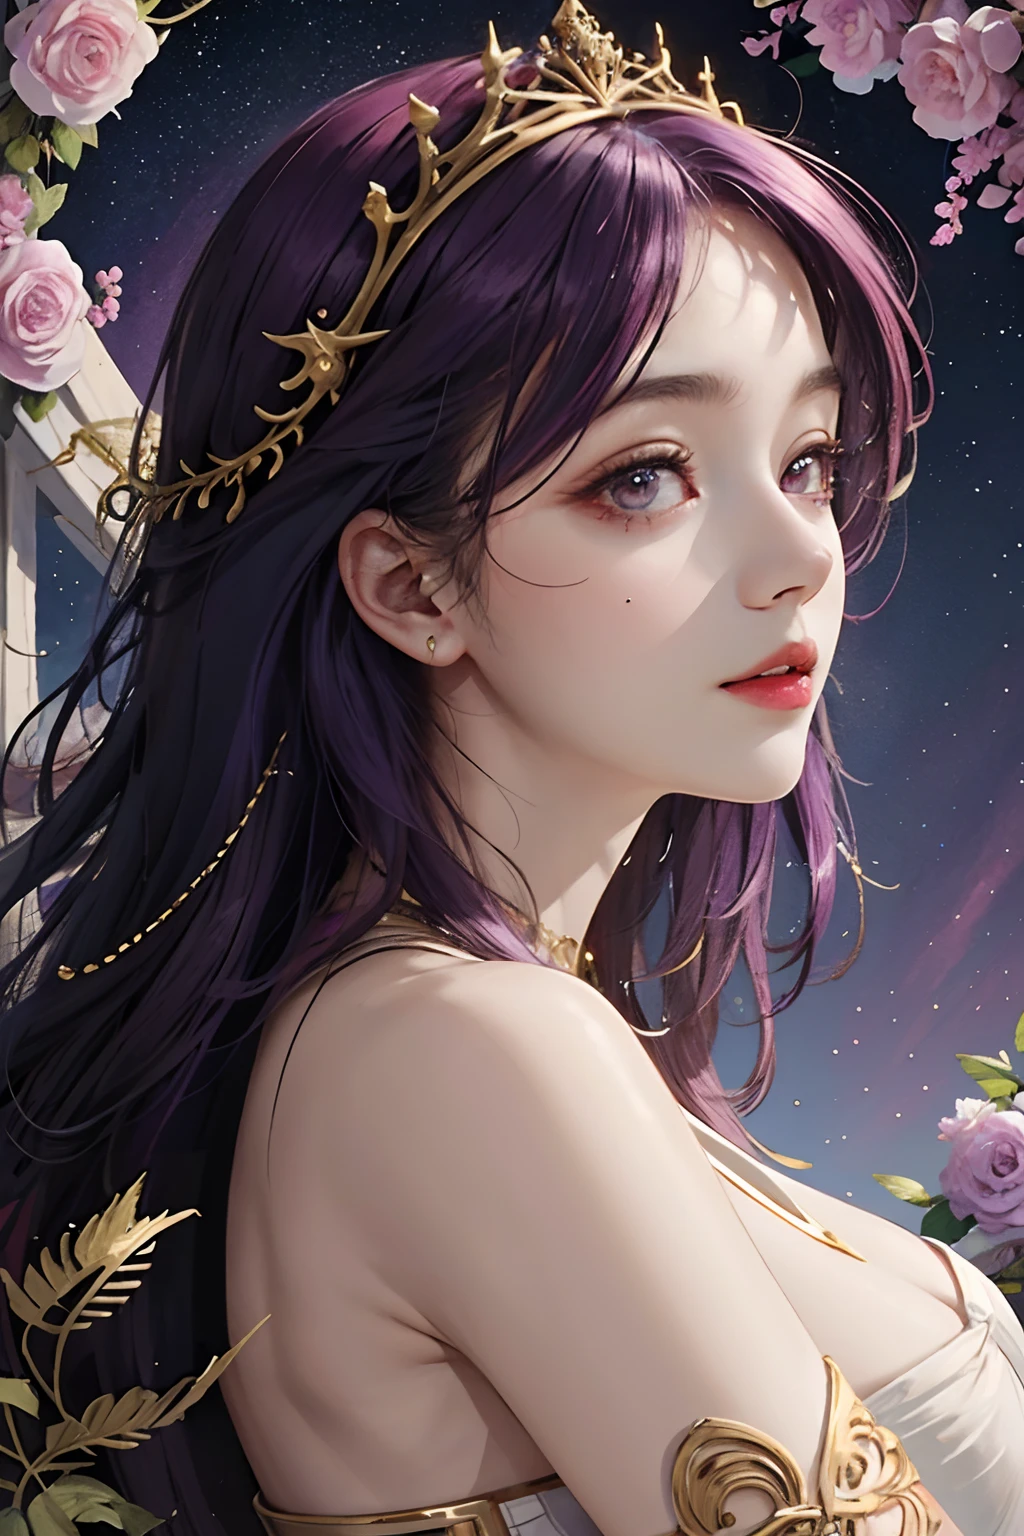 (masterpiece, top quality, best quality, official art, beautiful and aesthetic:1.2), (1girl), extreme detailed,colorful,highest detailed, official art, unity 8k wallpaper, ultra detailed, beautiful and aesthetic, beautiful, masterpiece, best quality, (zentangle, mandala, tangle, entangle) an angle female, long and curly bright purple hair angelic face and large purple eyes and plump red lips.snow white skin and charming figure in a white dress, long slender fingers and purple painted nails small moles under the eyes ,holy light,gold foil,gold leaf art,glitter drawing, PerfectNwsjMajic